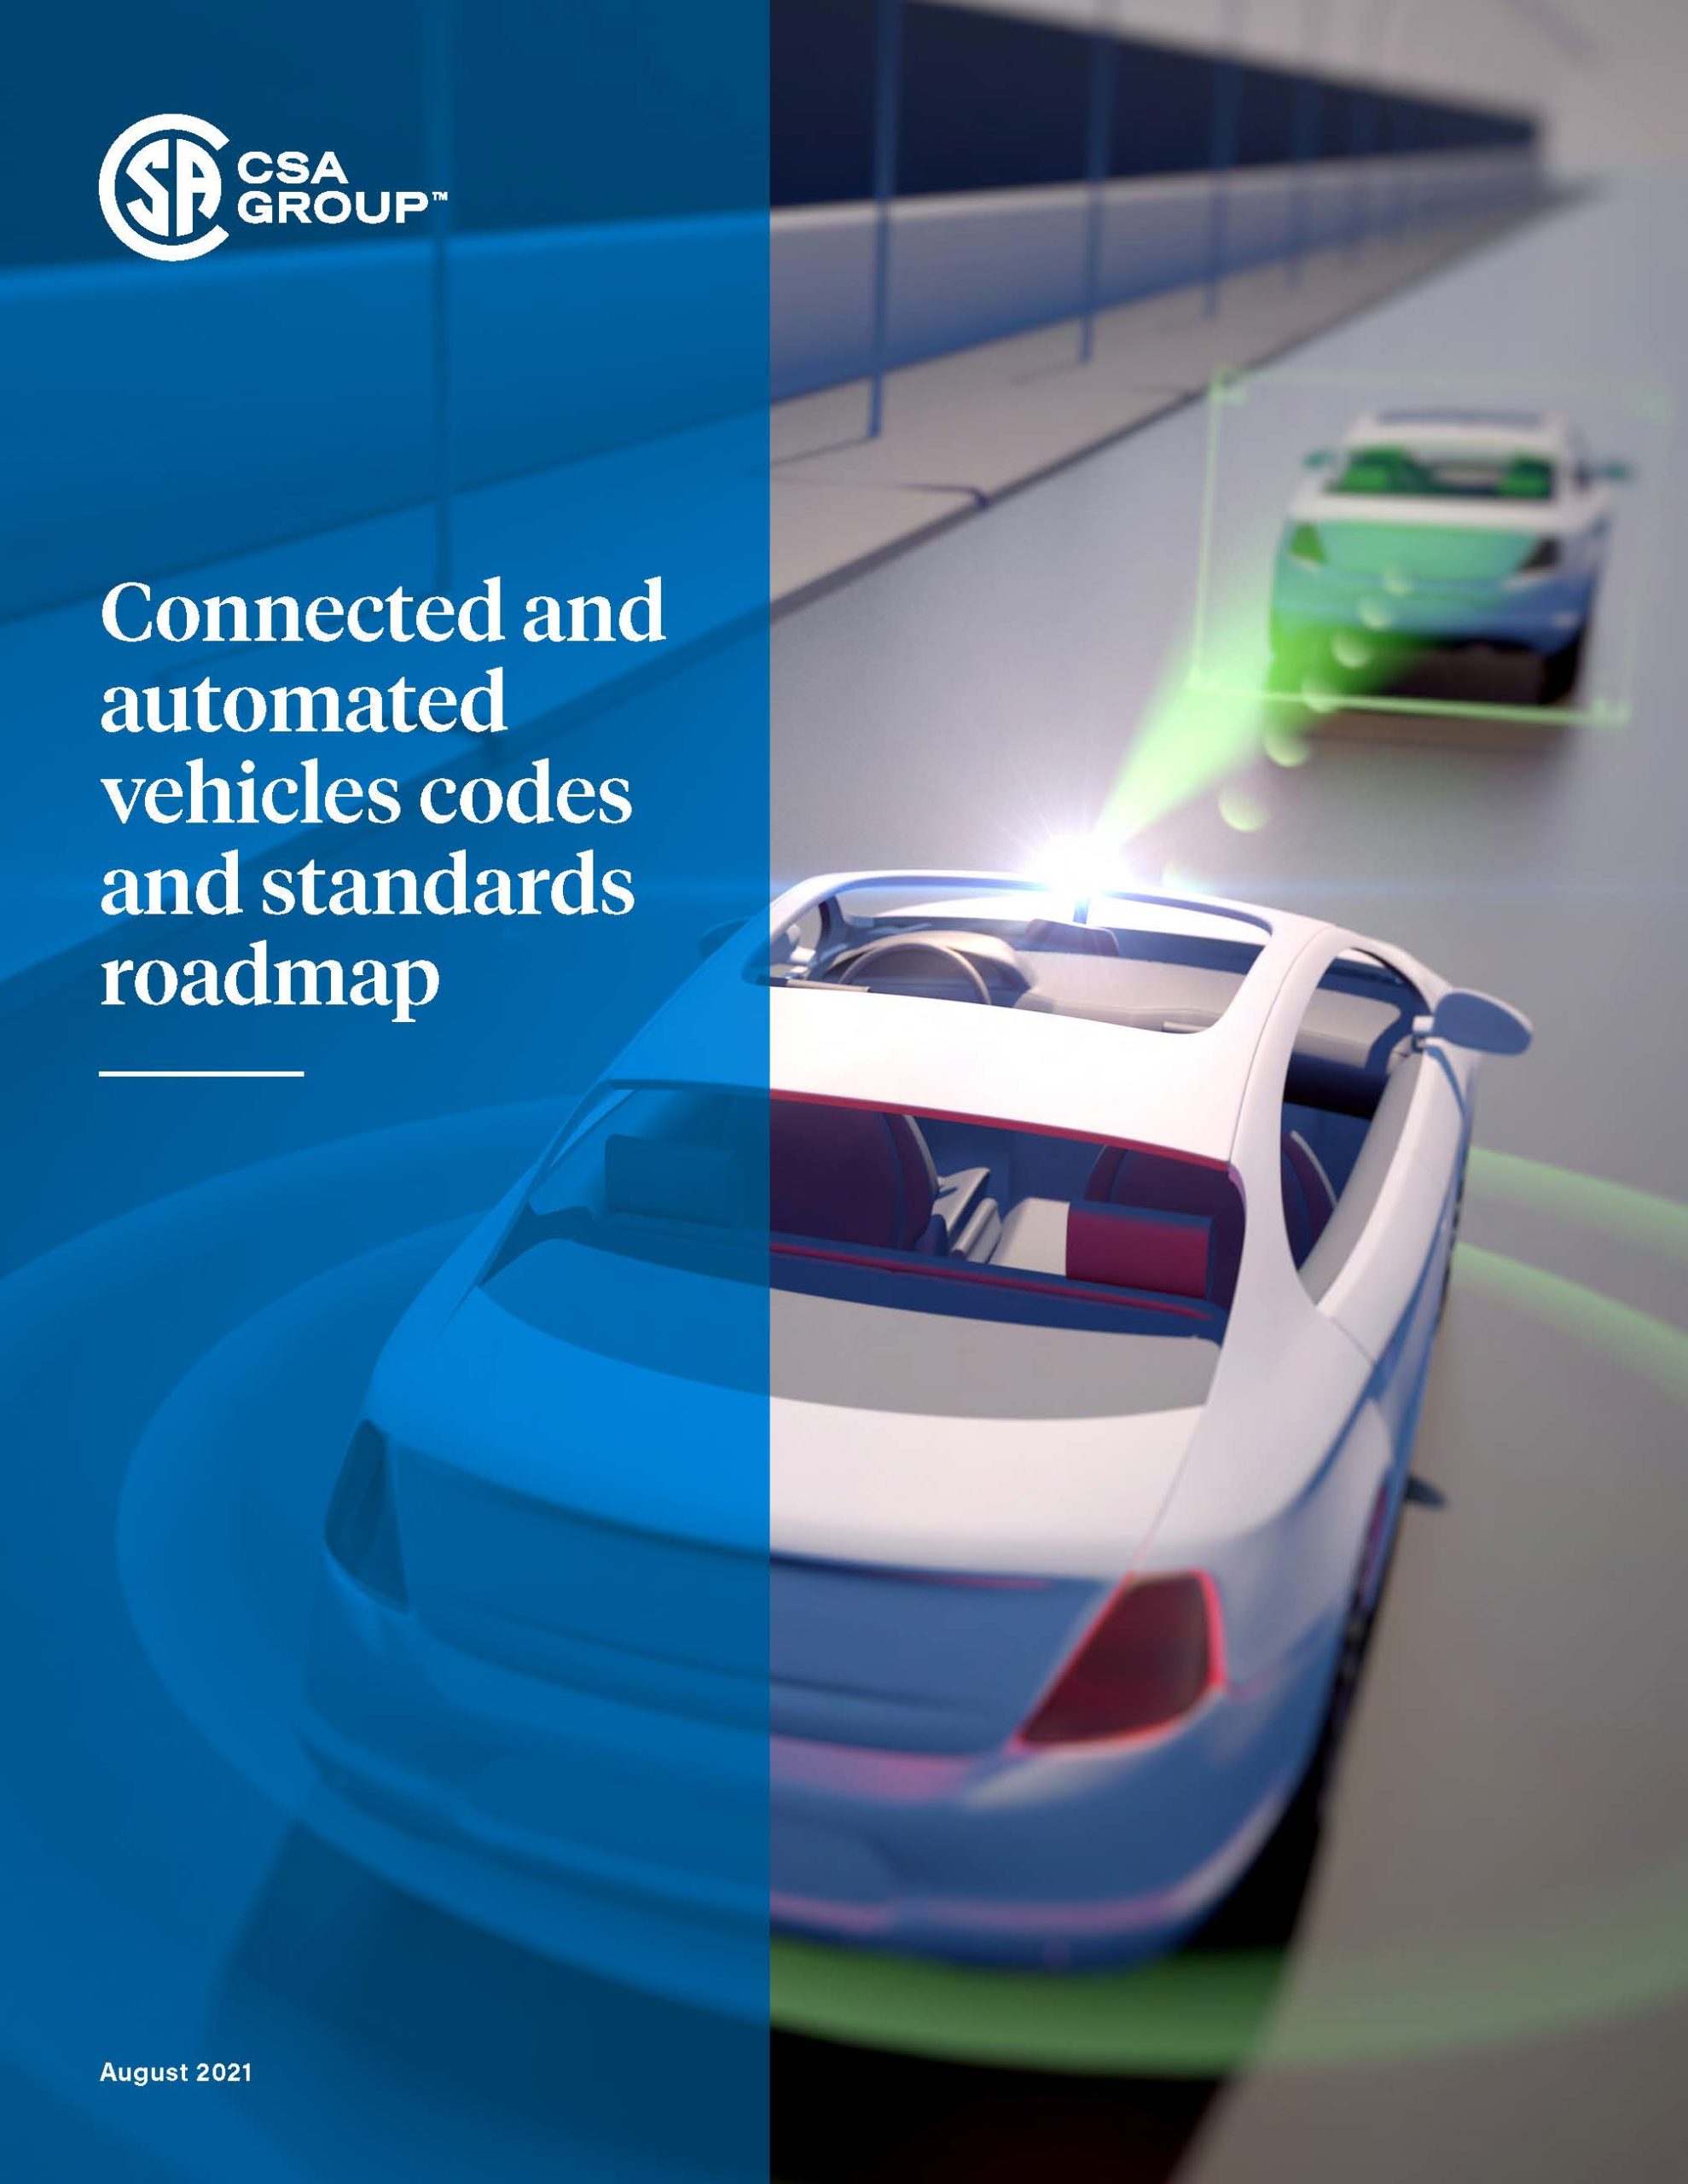 Featured Image. A title page of a report “Connected and automated vehicles codes and standards roadmap.”